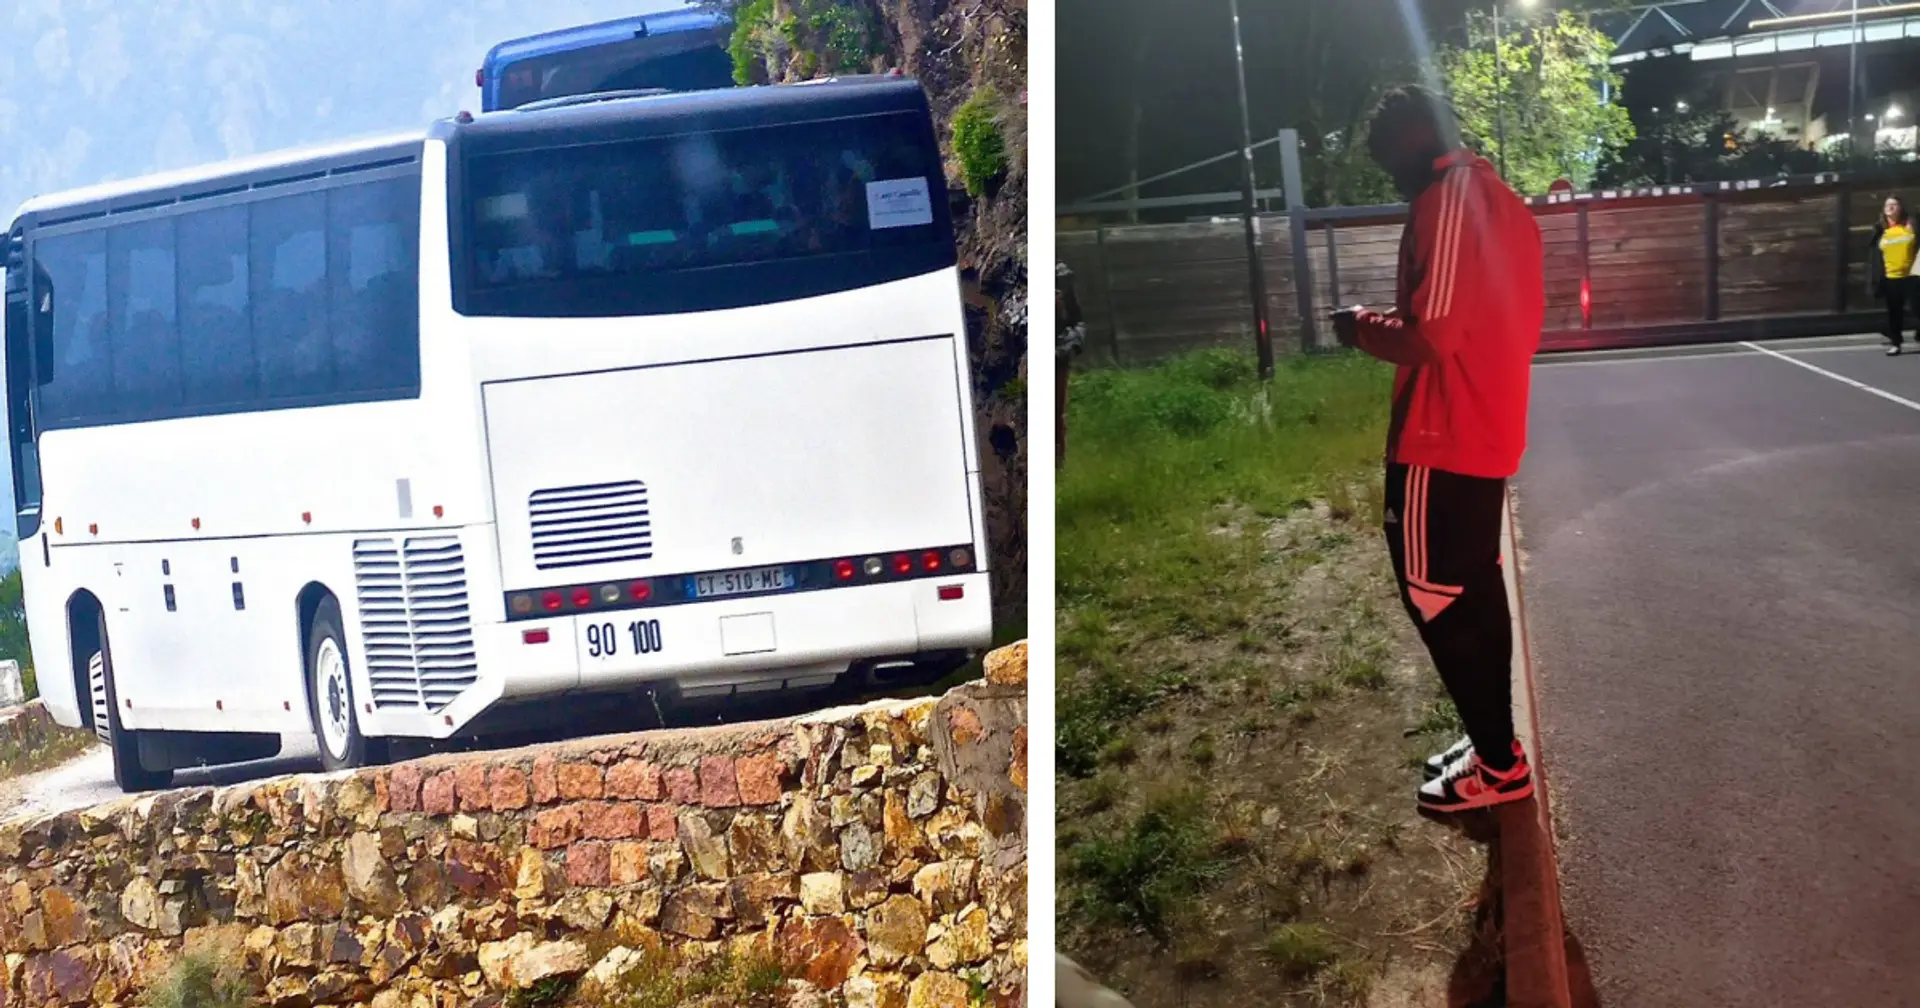 Ligue 1 team forget their striker after defeat, bus leaves stadium without him